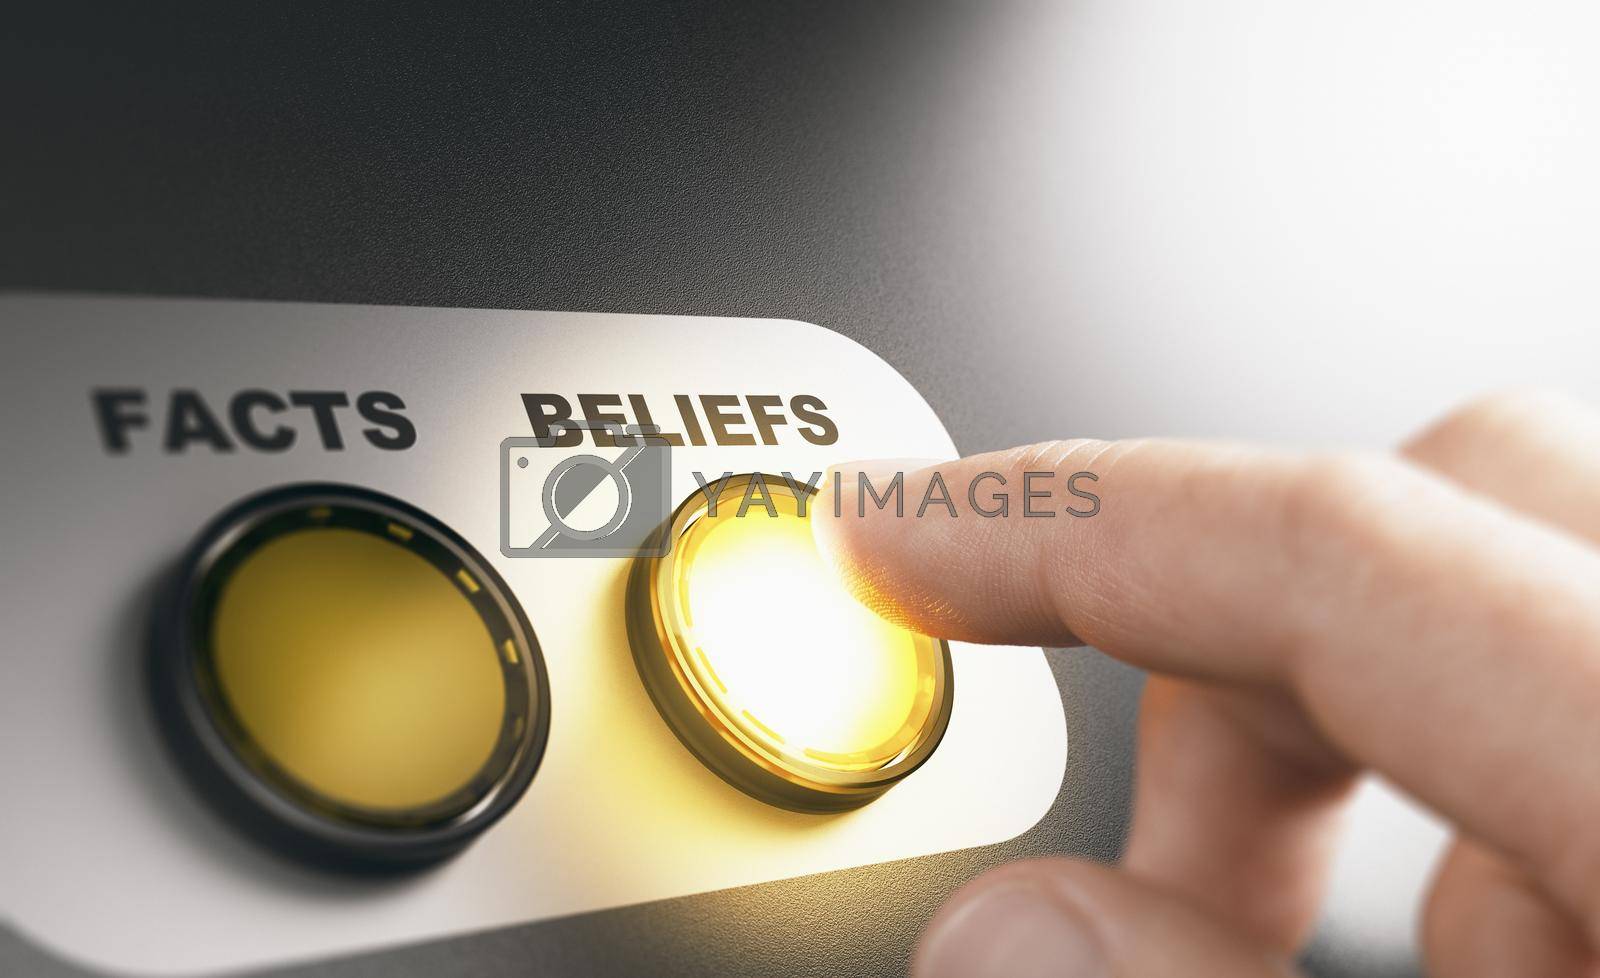 Finger pressing a button with the word beliefs intead of facts during a cognitive psychological experiment. Composite image between a hand photography and a 3D background.